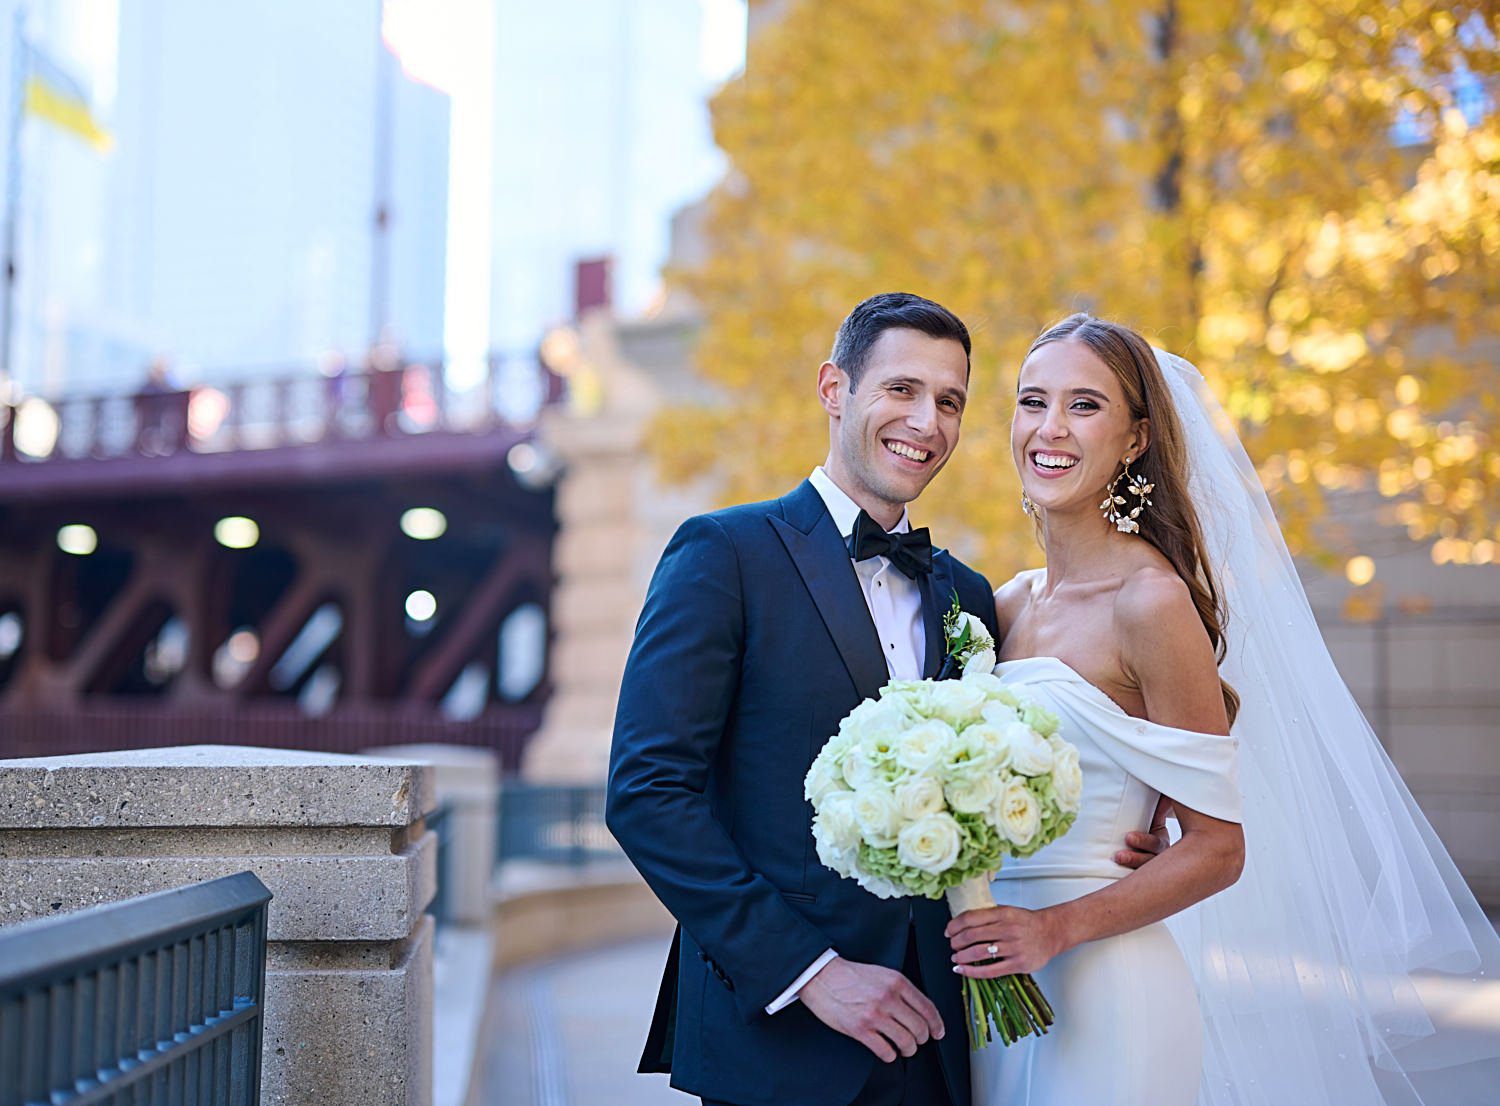 chicago langham wedding photography fall colors outdoors bride groom